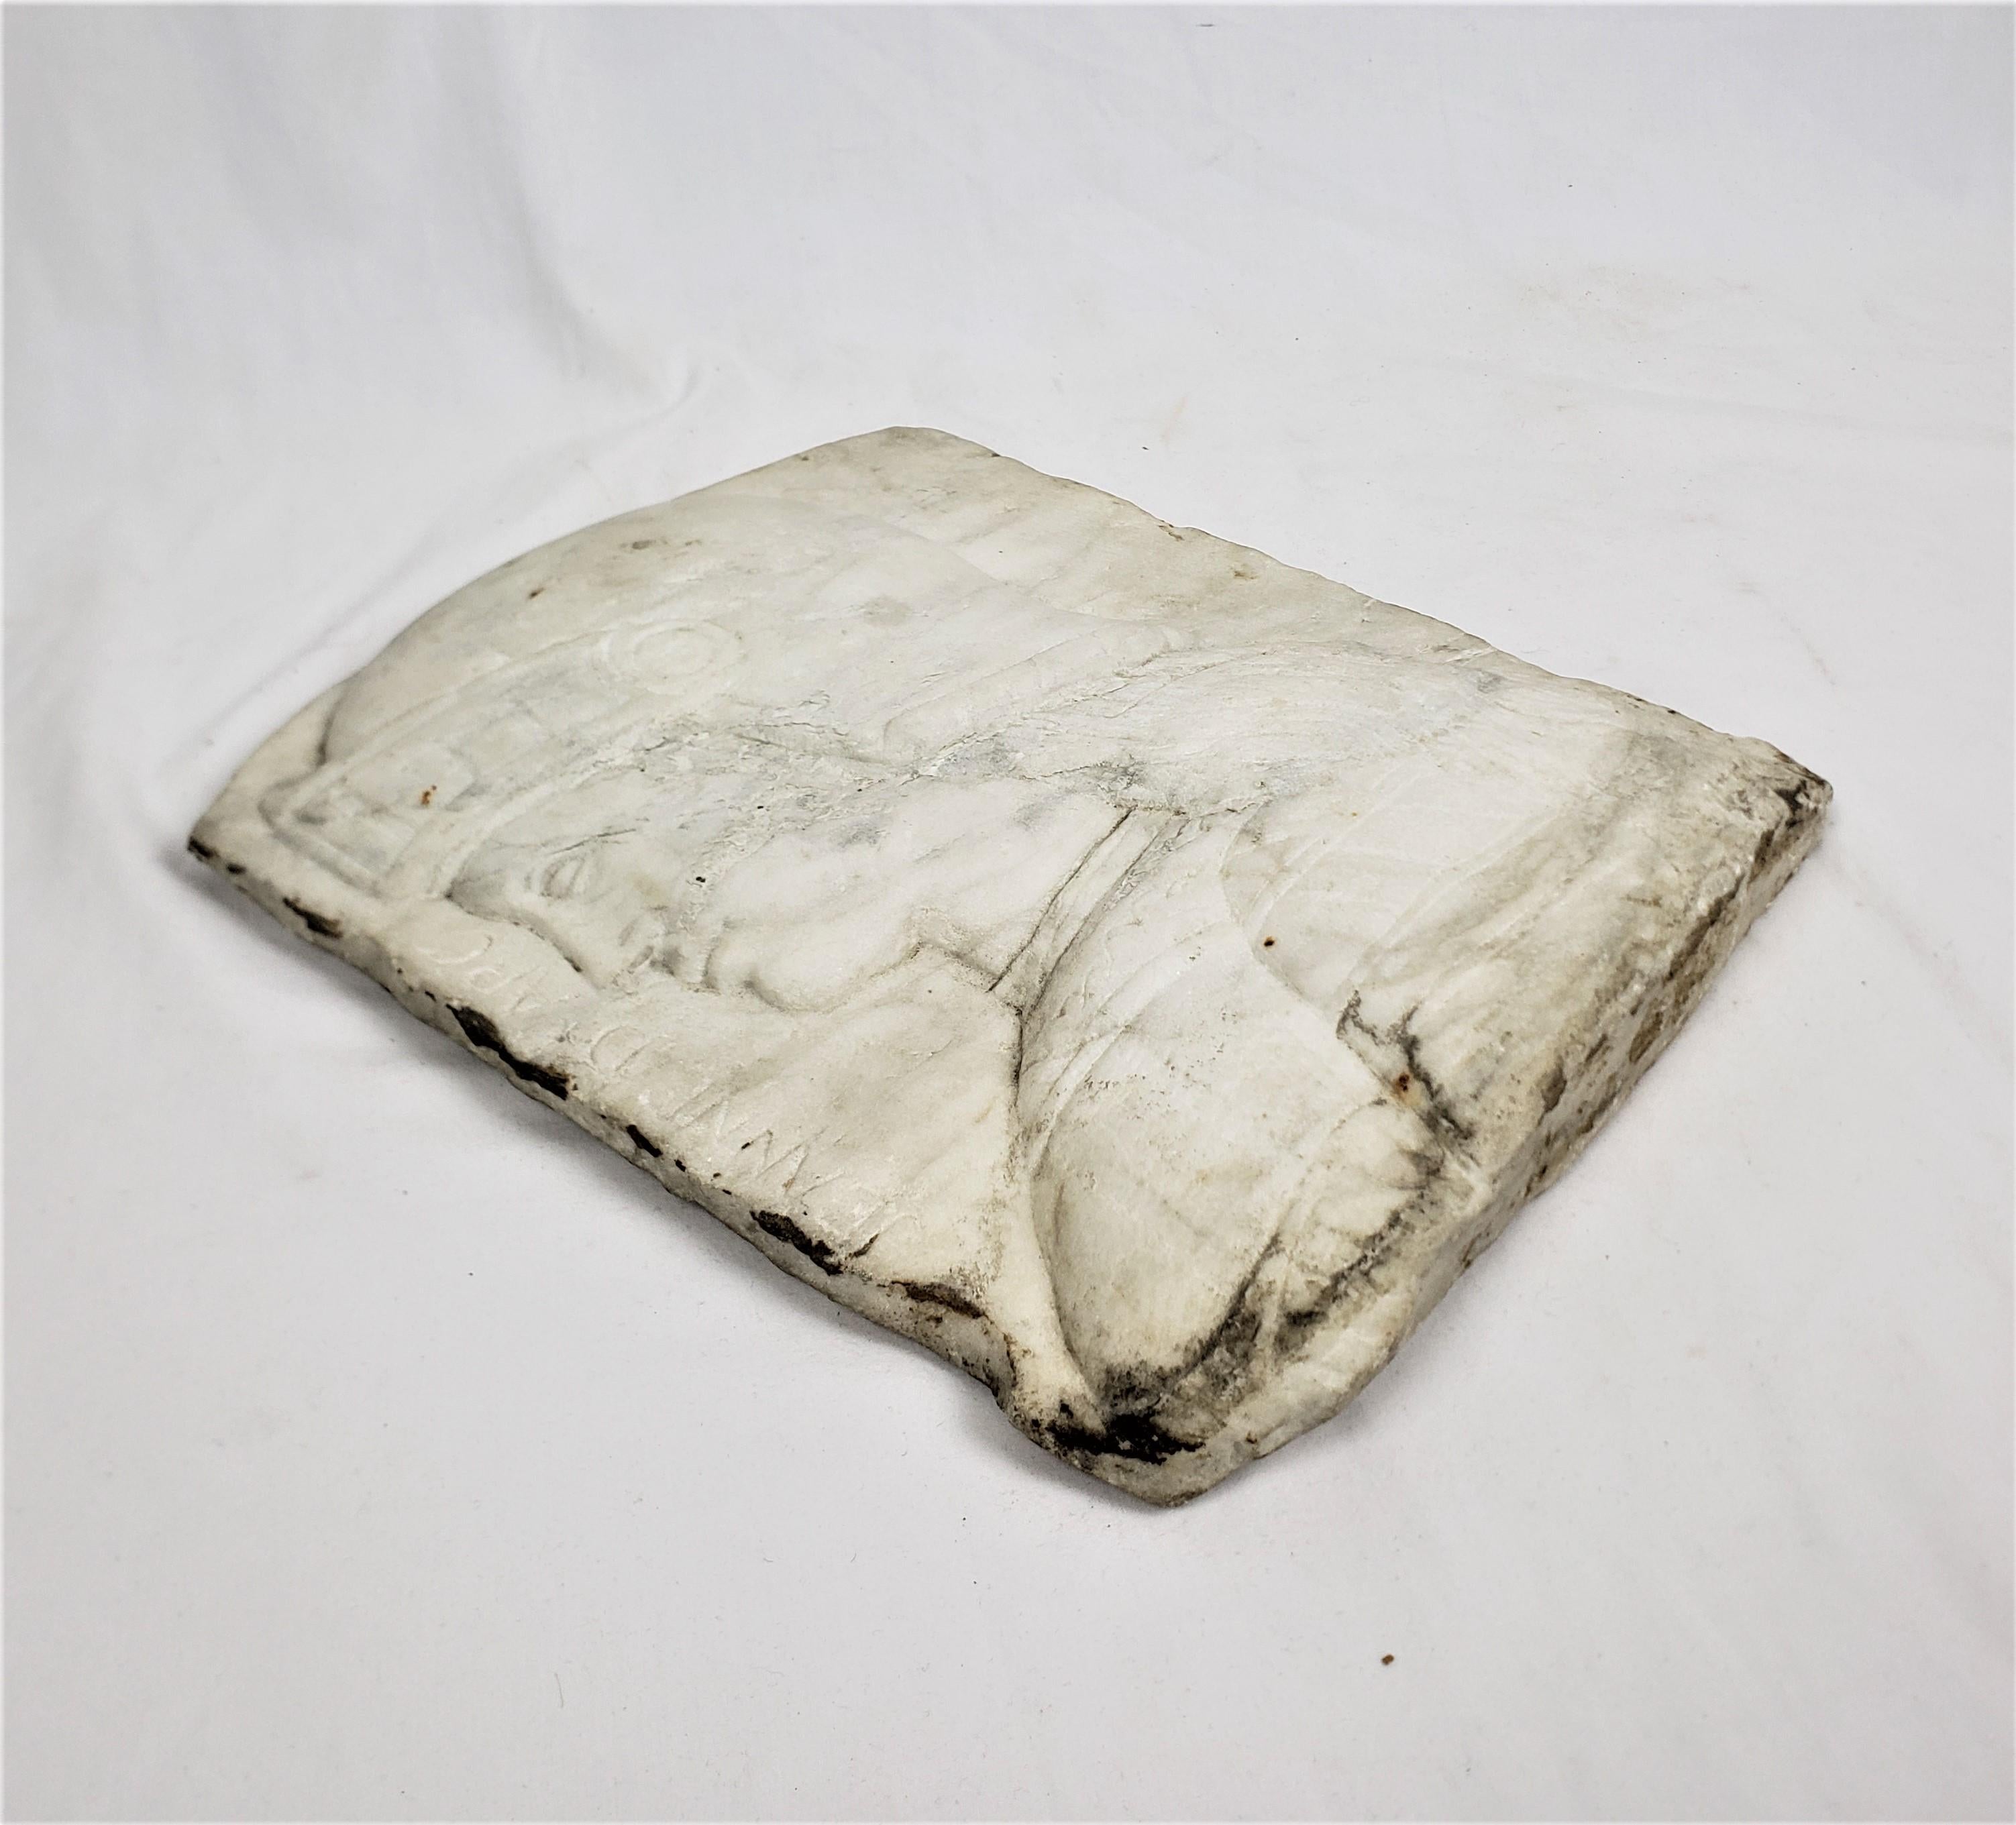 This salvaged carved architectural element is unsigned, but presumed to have originated from France and date to approximately 1835 and done in a Neoclassical style. This antique fragment is done with a slab of carrera marble and depicts the facial